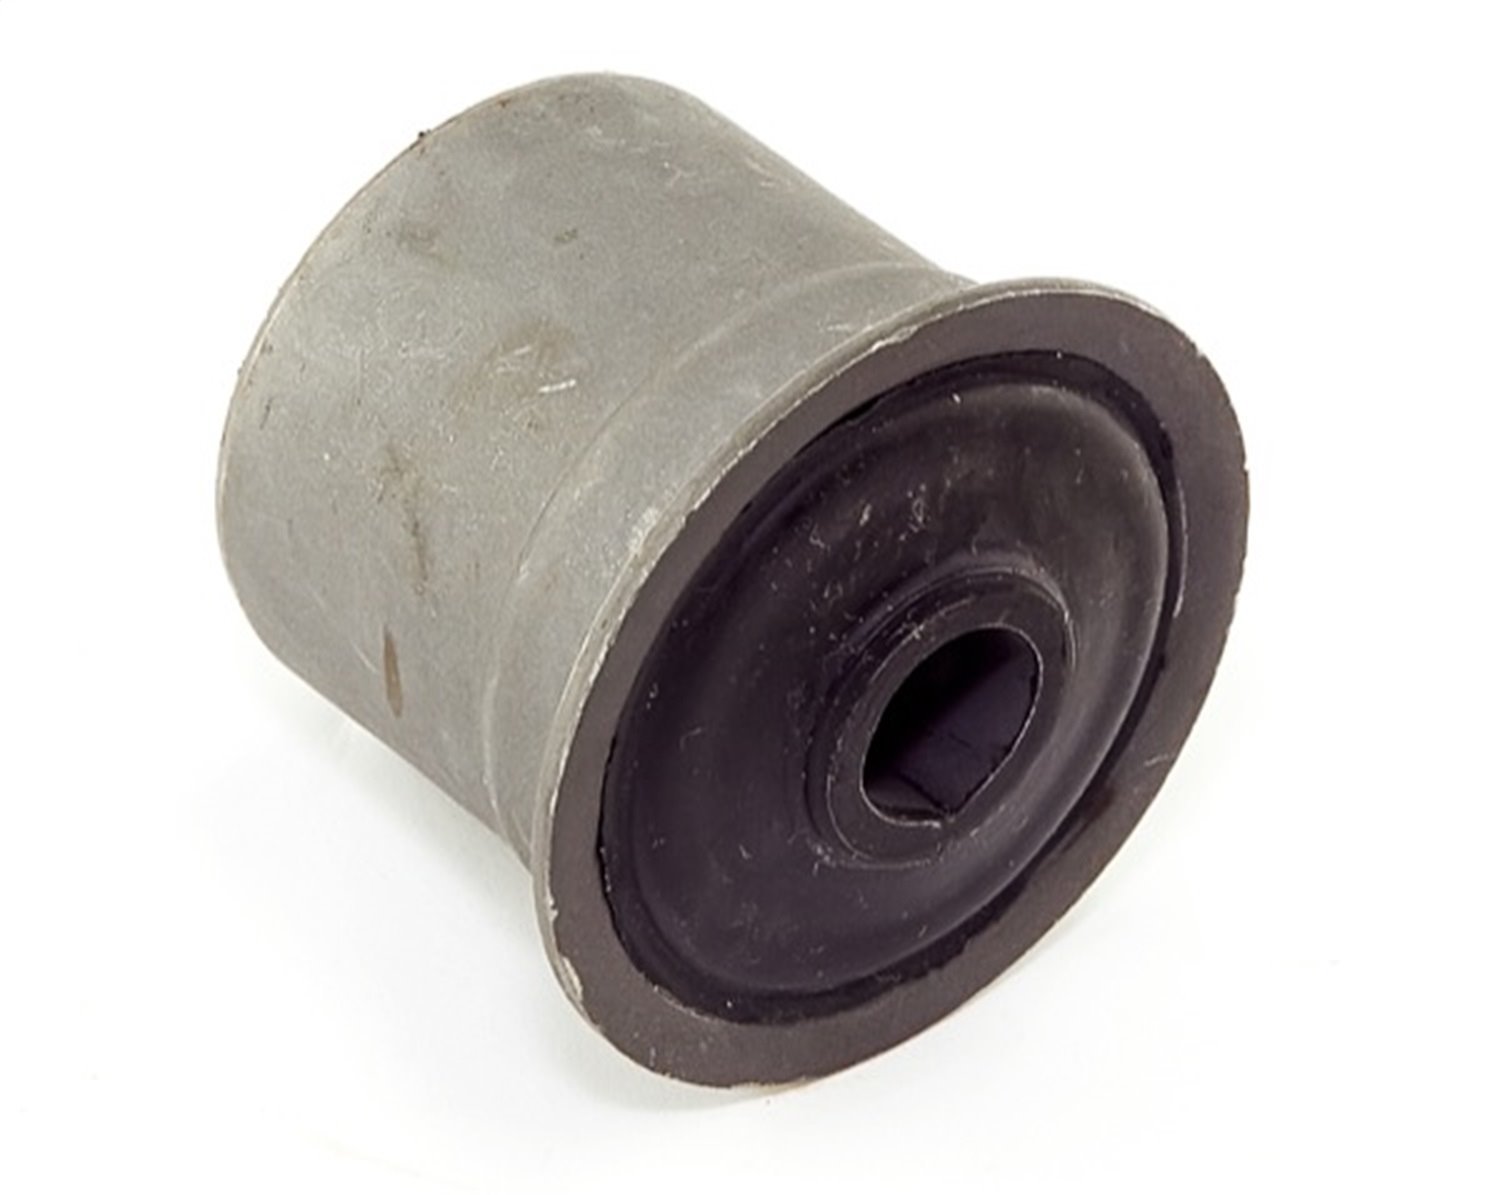 Replacement lower control arm bushing from Omix-ADA, Fits